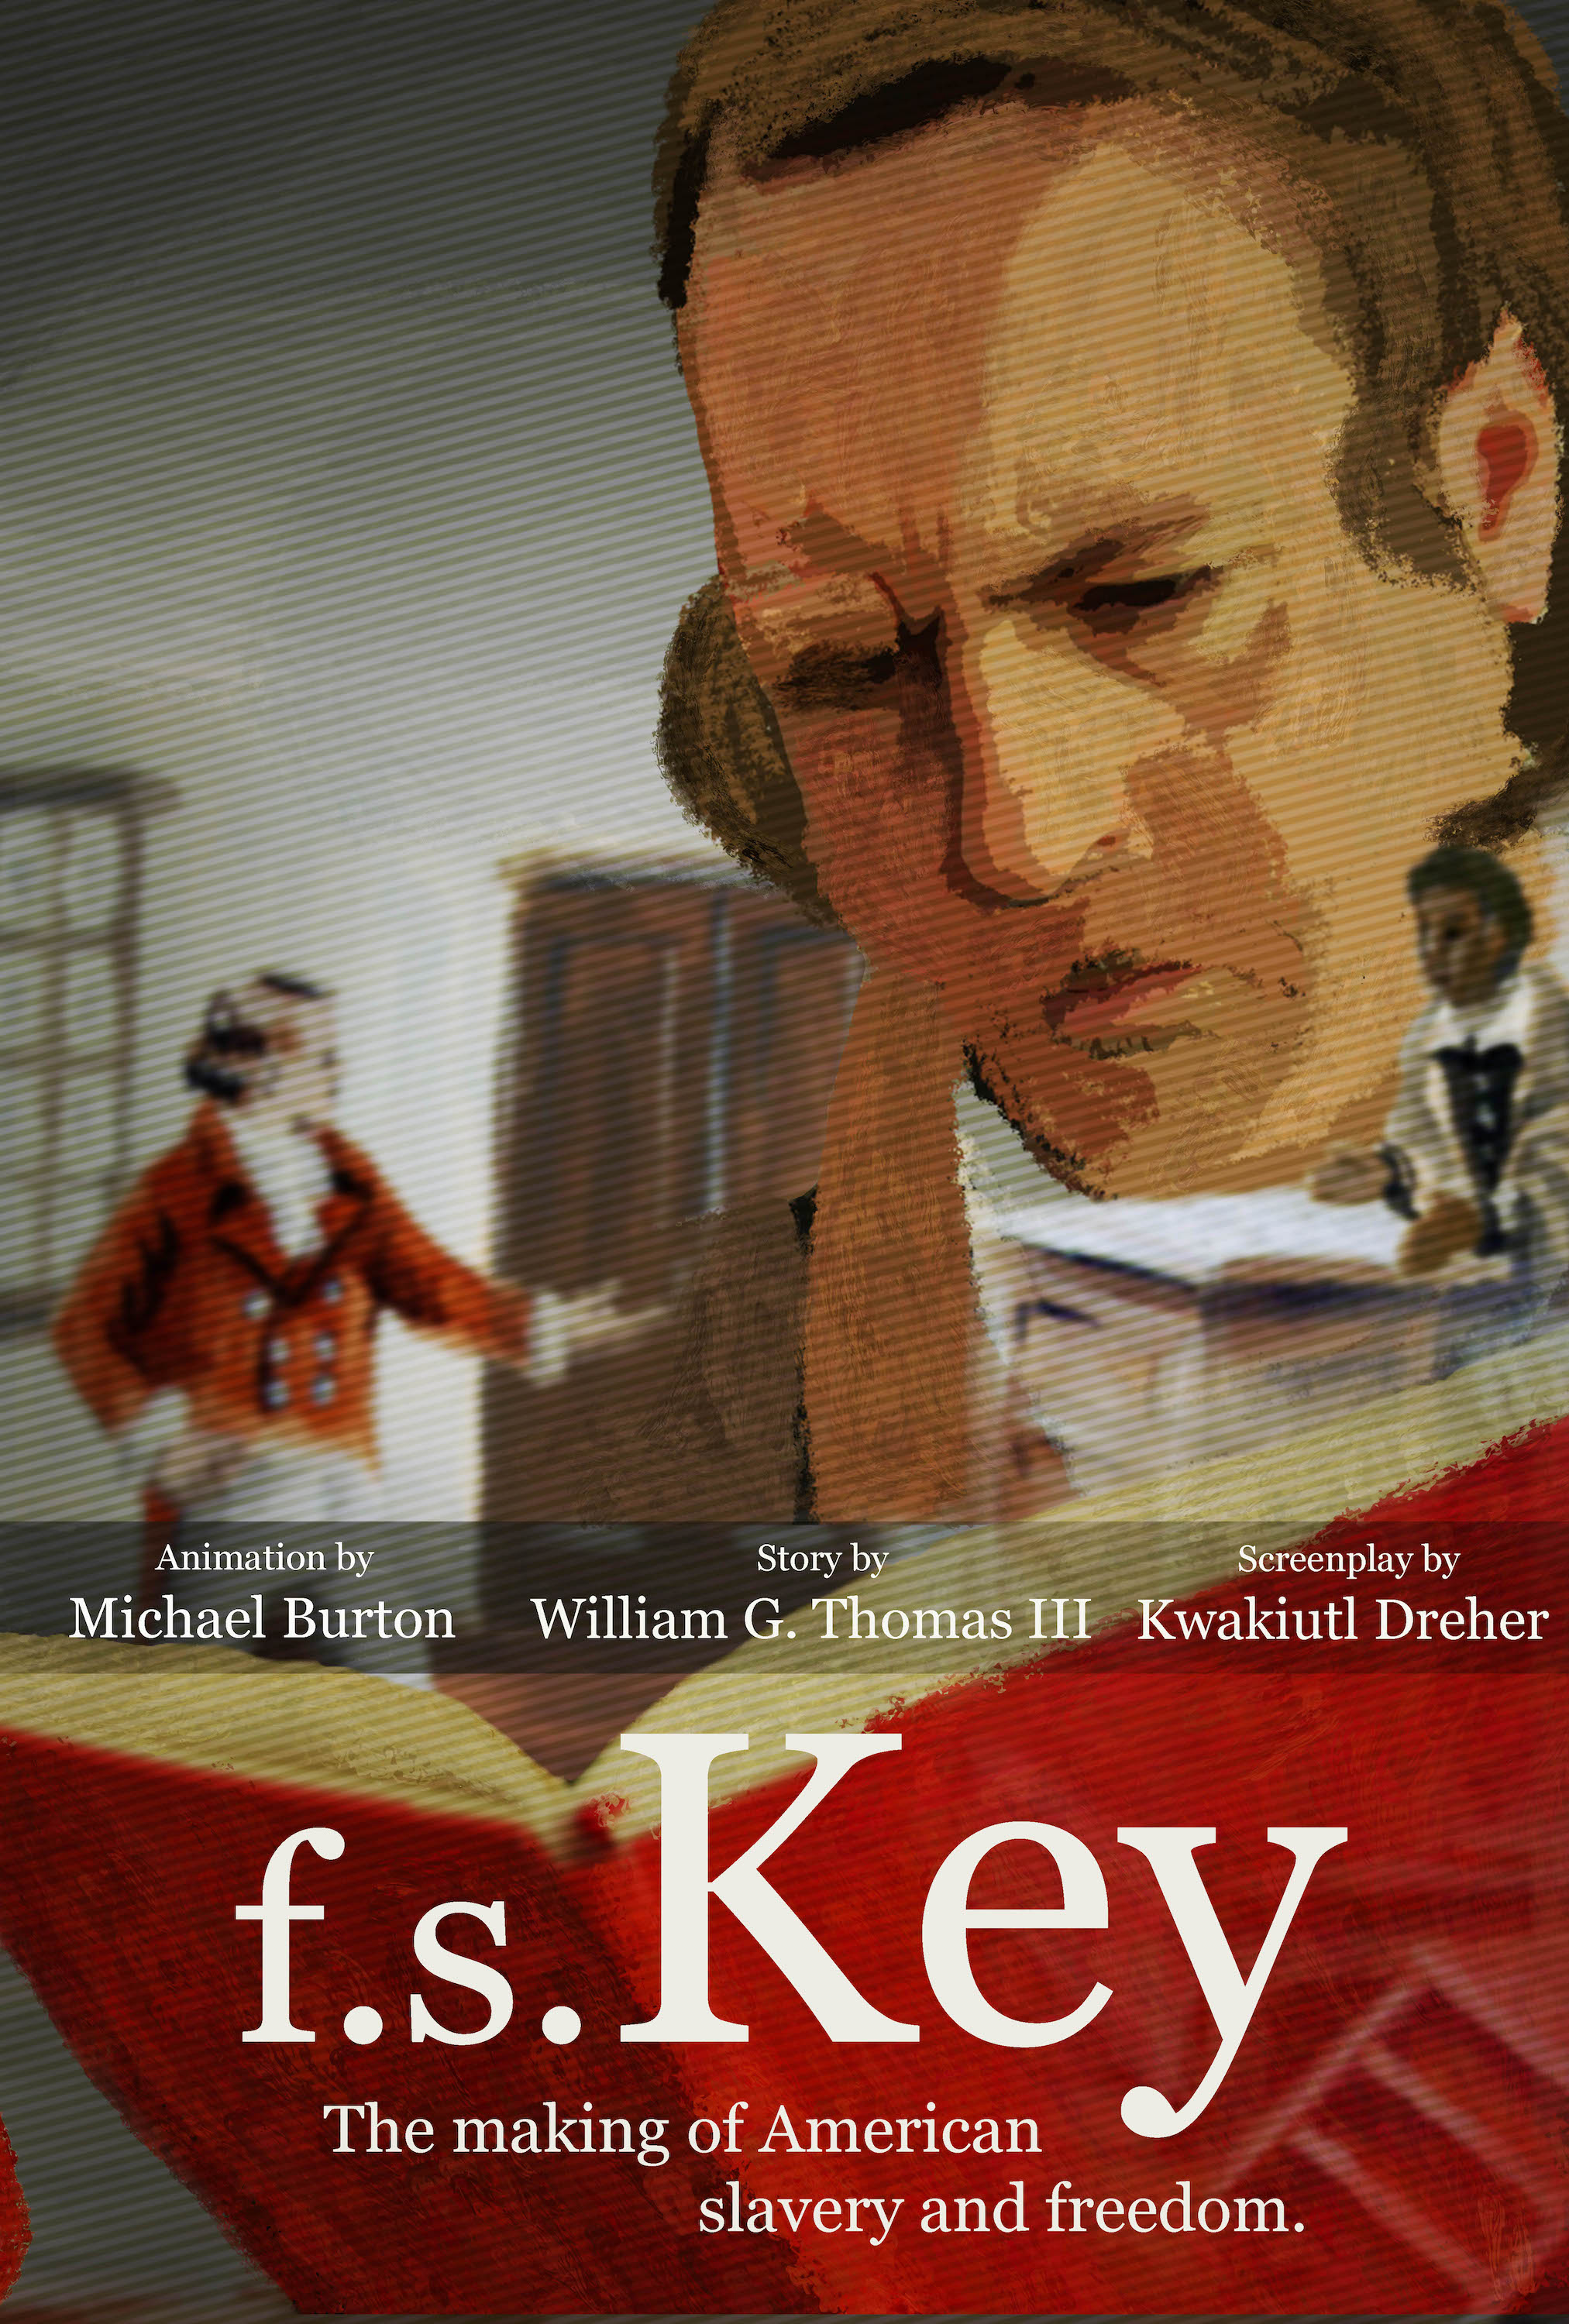 Movie poster for the animated film f.s. Key.